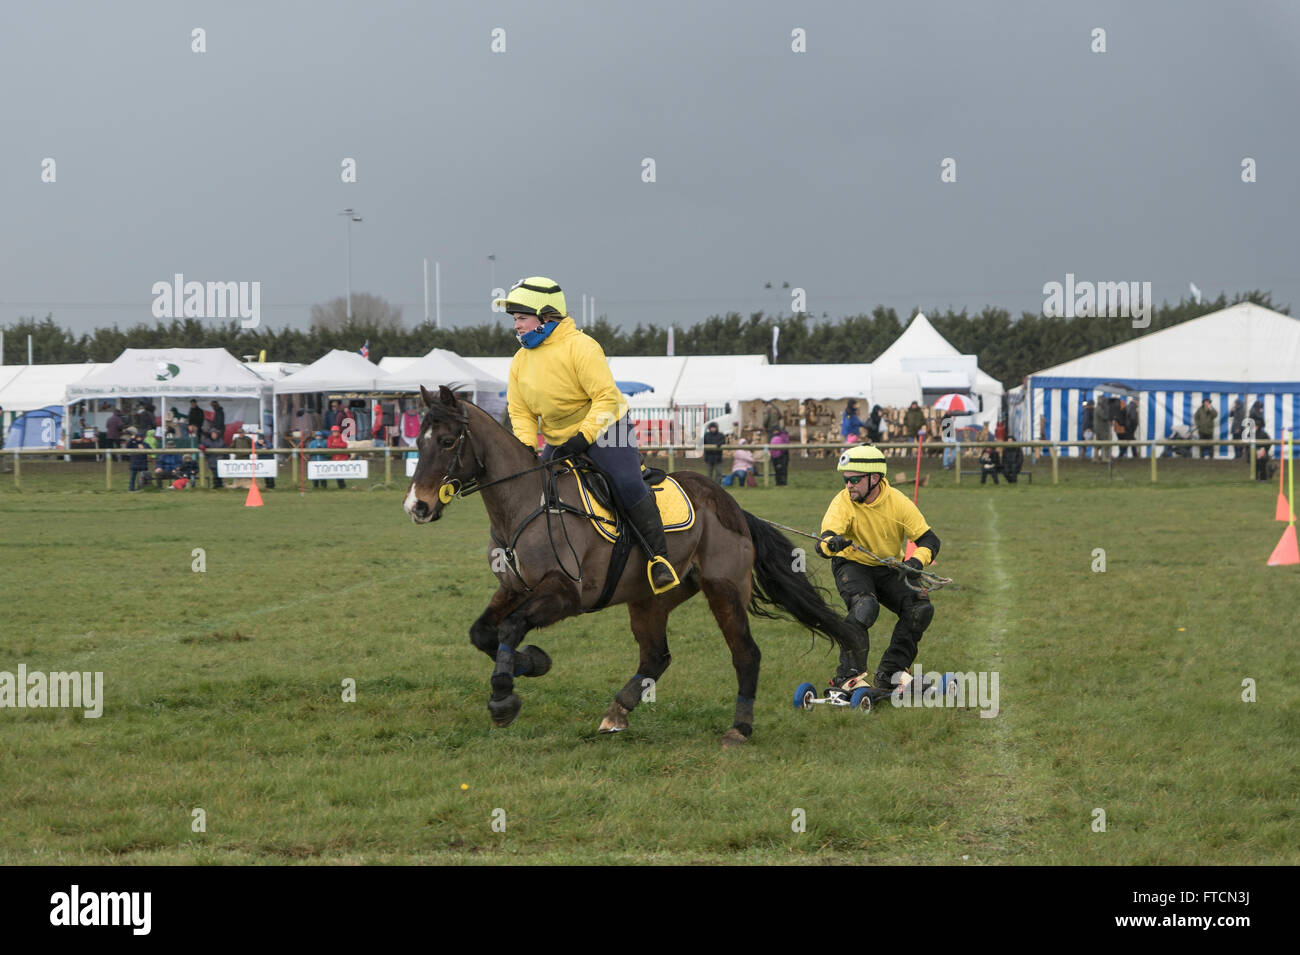 The Living Heritage Country show.Riders and boarders compete in the Horse boarding event. Credit:  Scott Carruthers/Alamy Live News Stock Photo